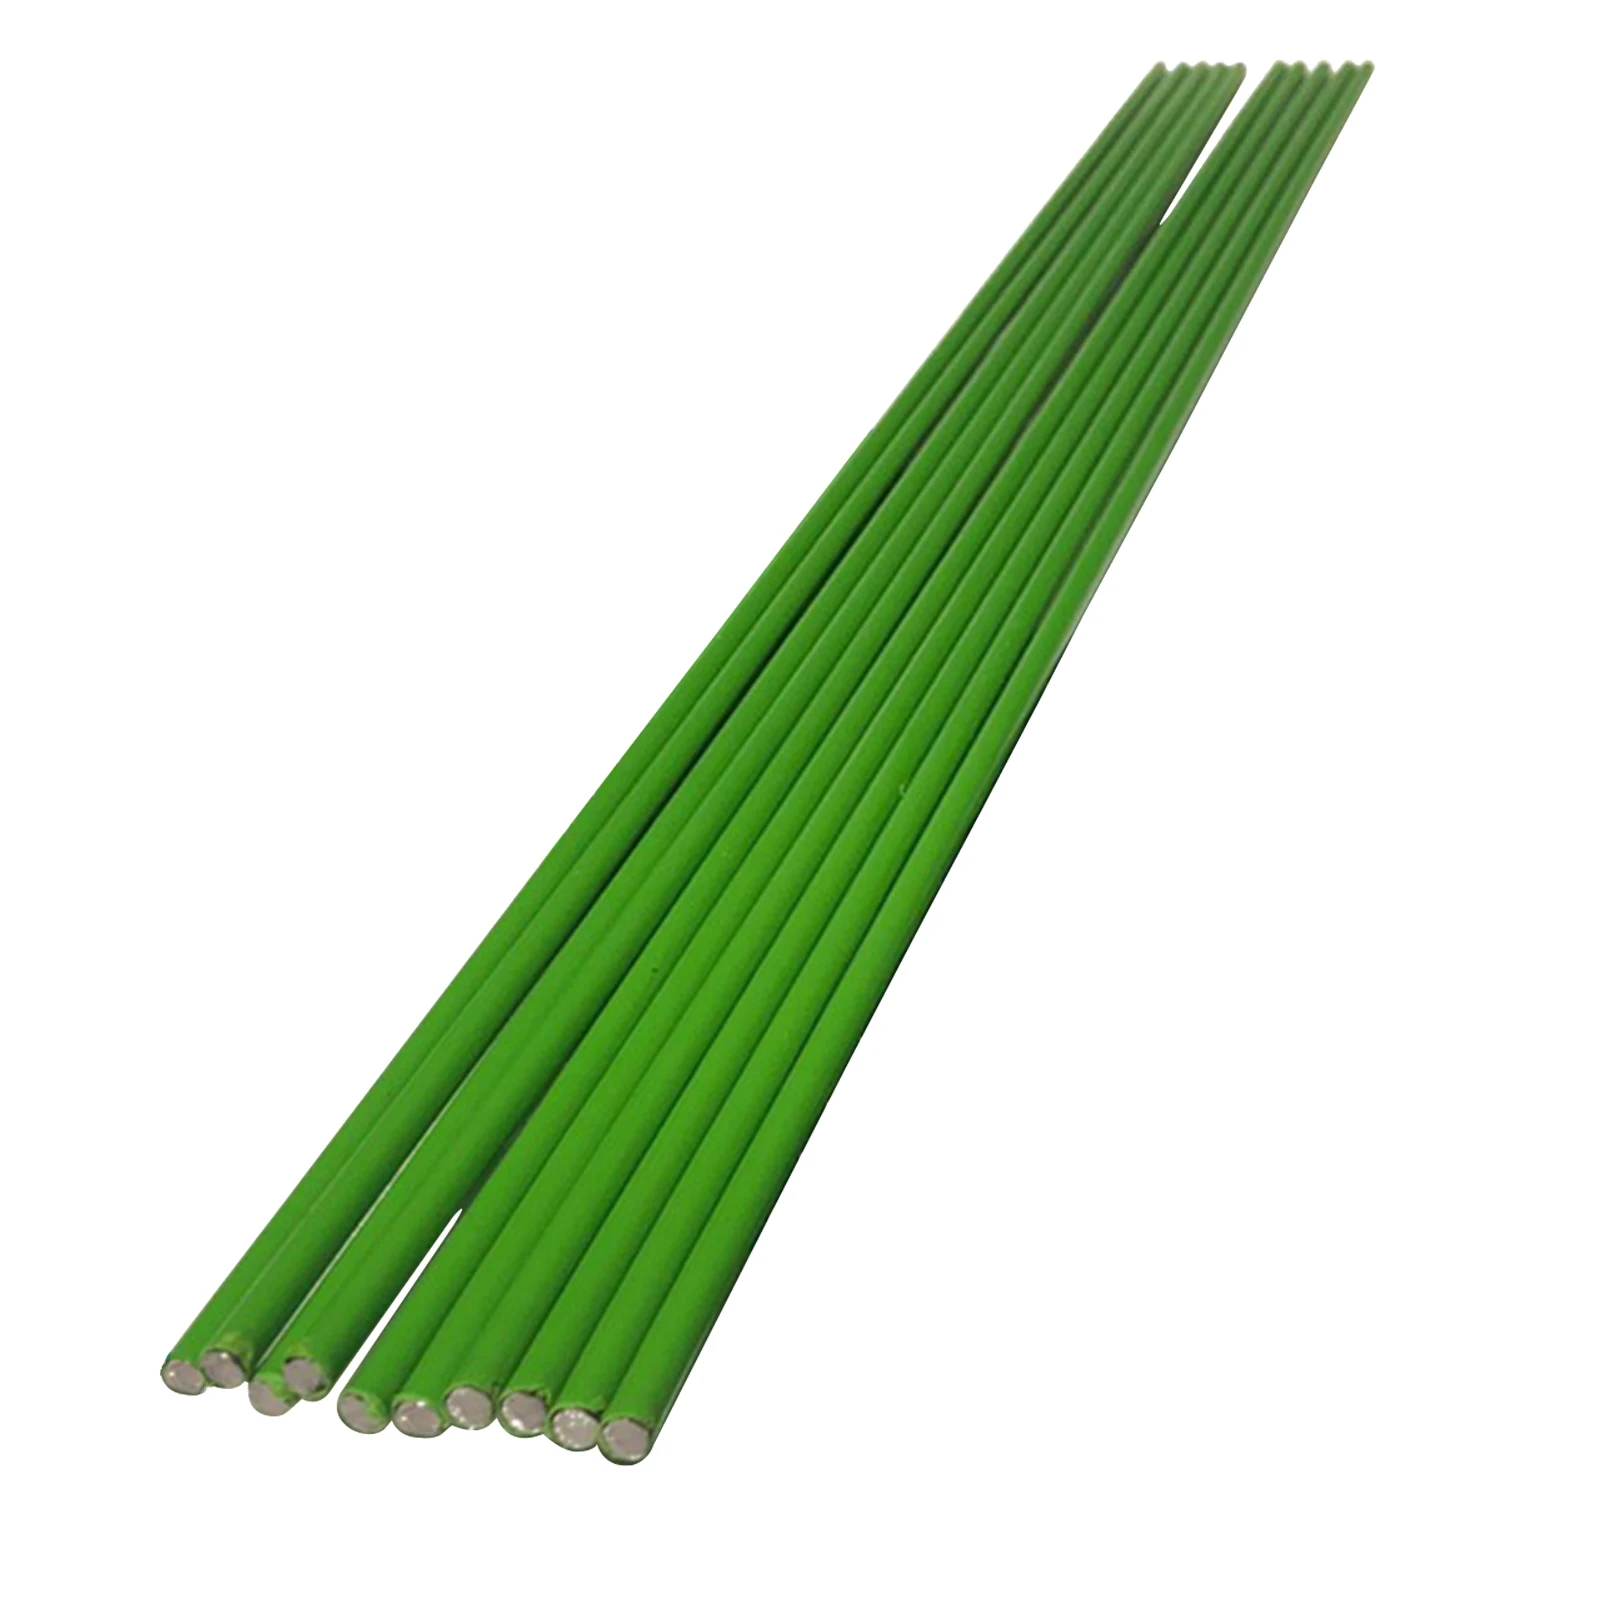 

10pcs 50cm Easy Install With Cable Ties Green Outdoor Garden Indoor Plant Support Stake Iron Wire Lightweight Flower Reusable